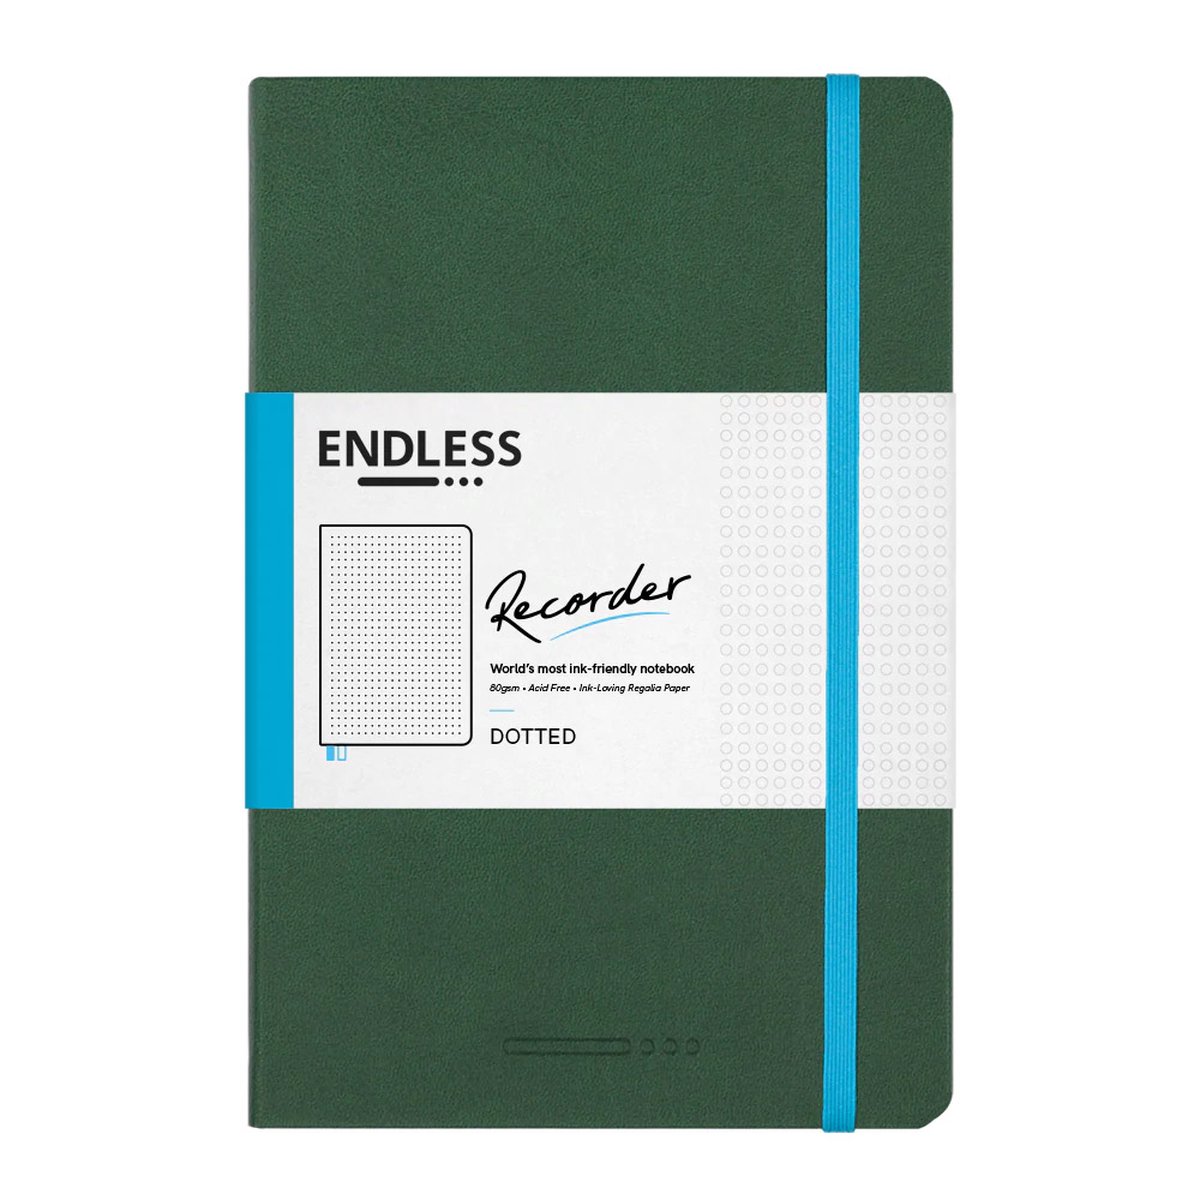 Endless Recorder Notebook Forest Canopy Regalia Paper - Dotted